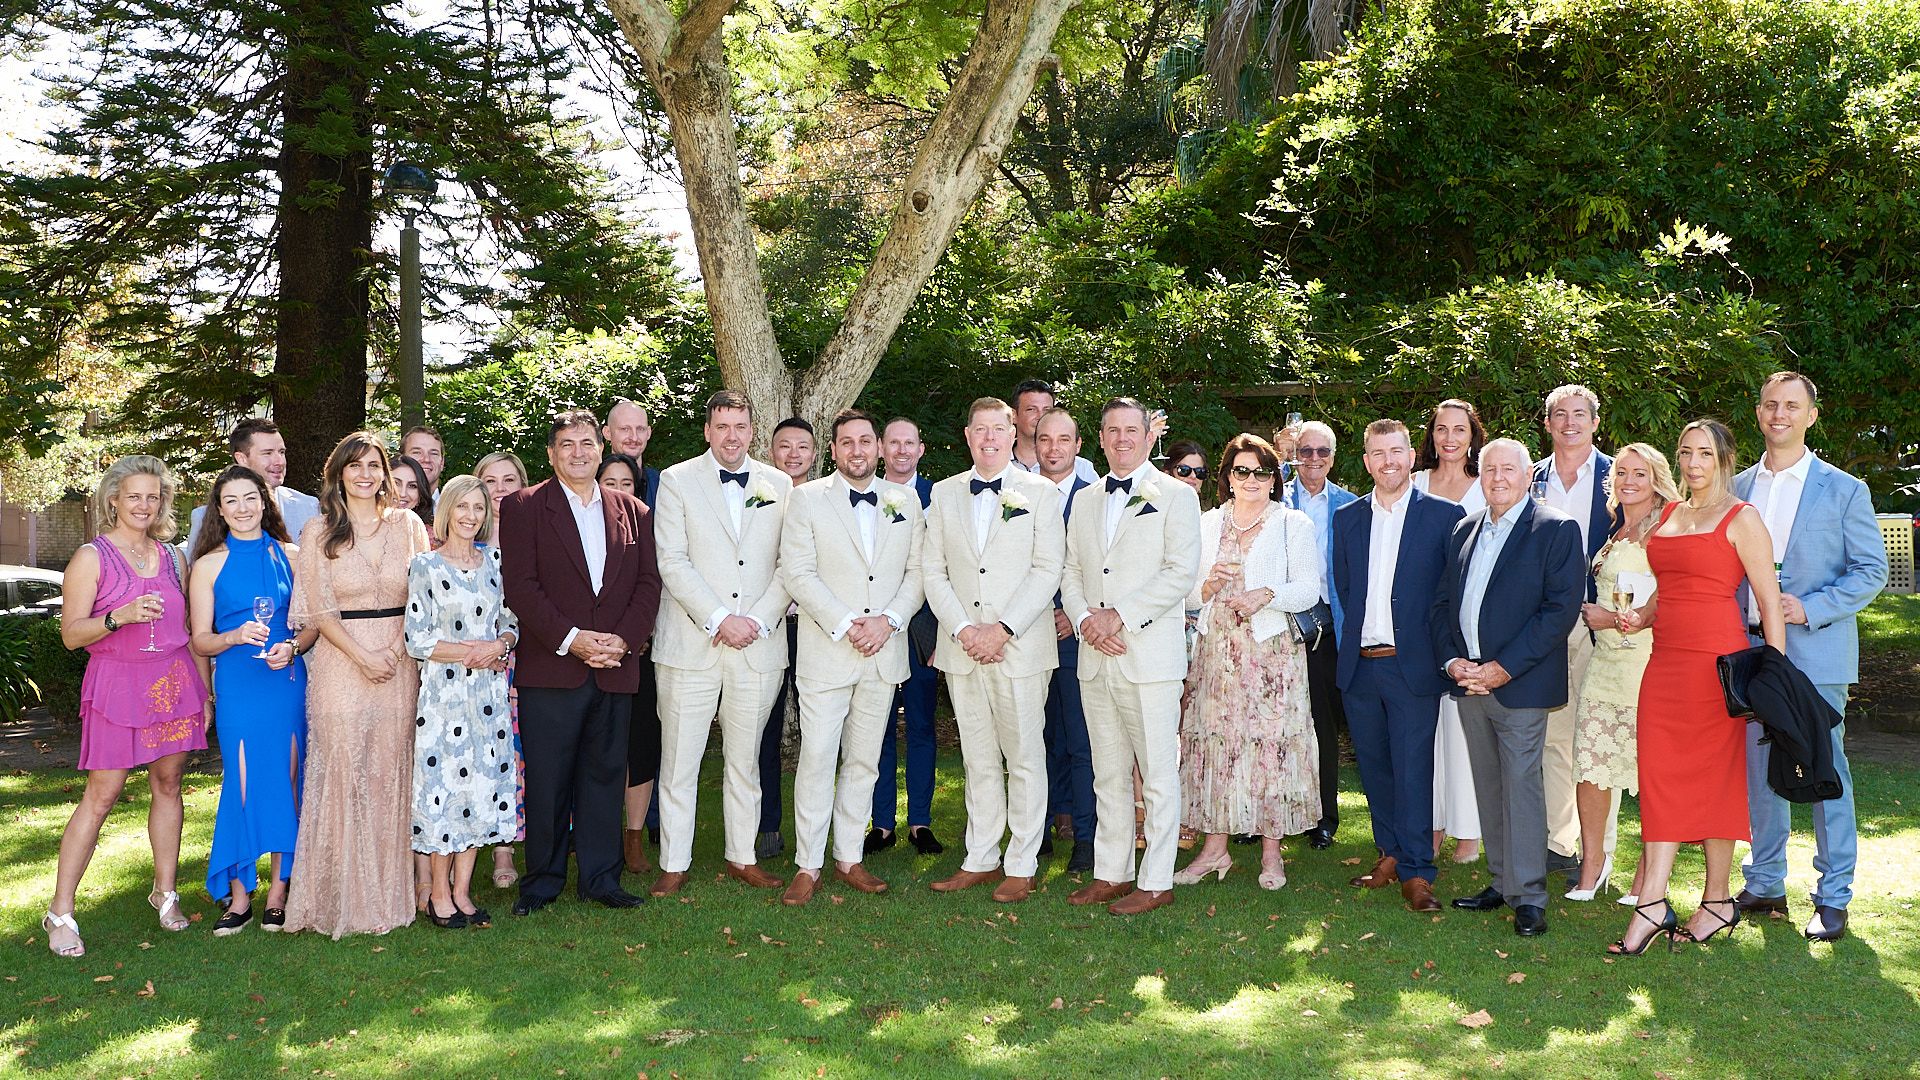 Group Photo of the Wedding Party for Mark and Matthew at Chiswick Gardens, Woollahra. Photography By orlandosydney.com